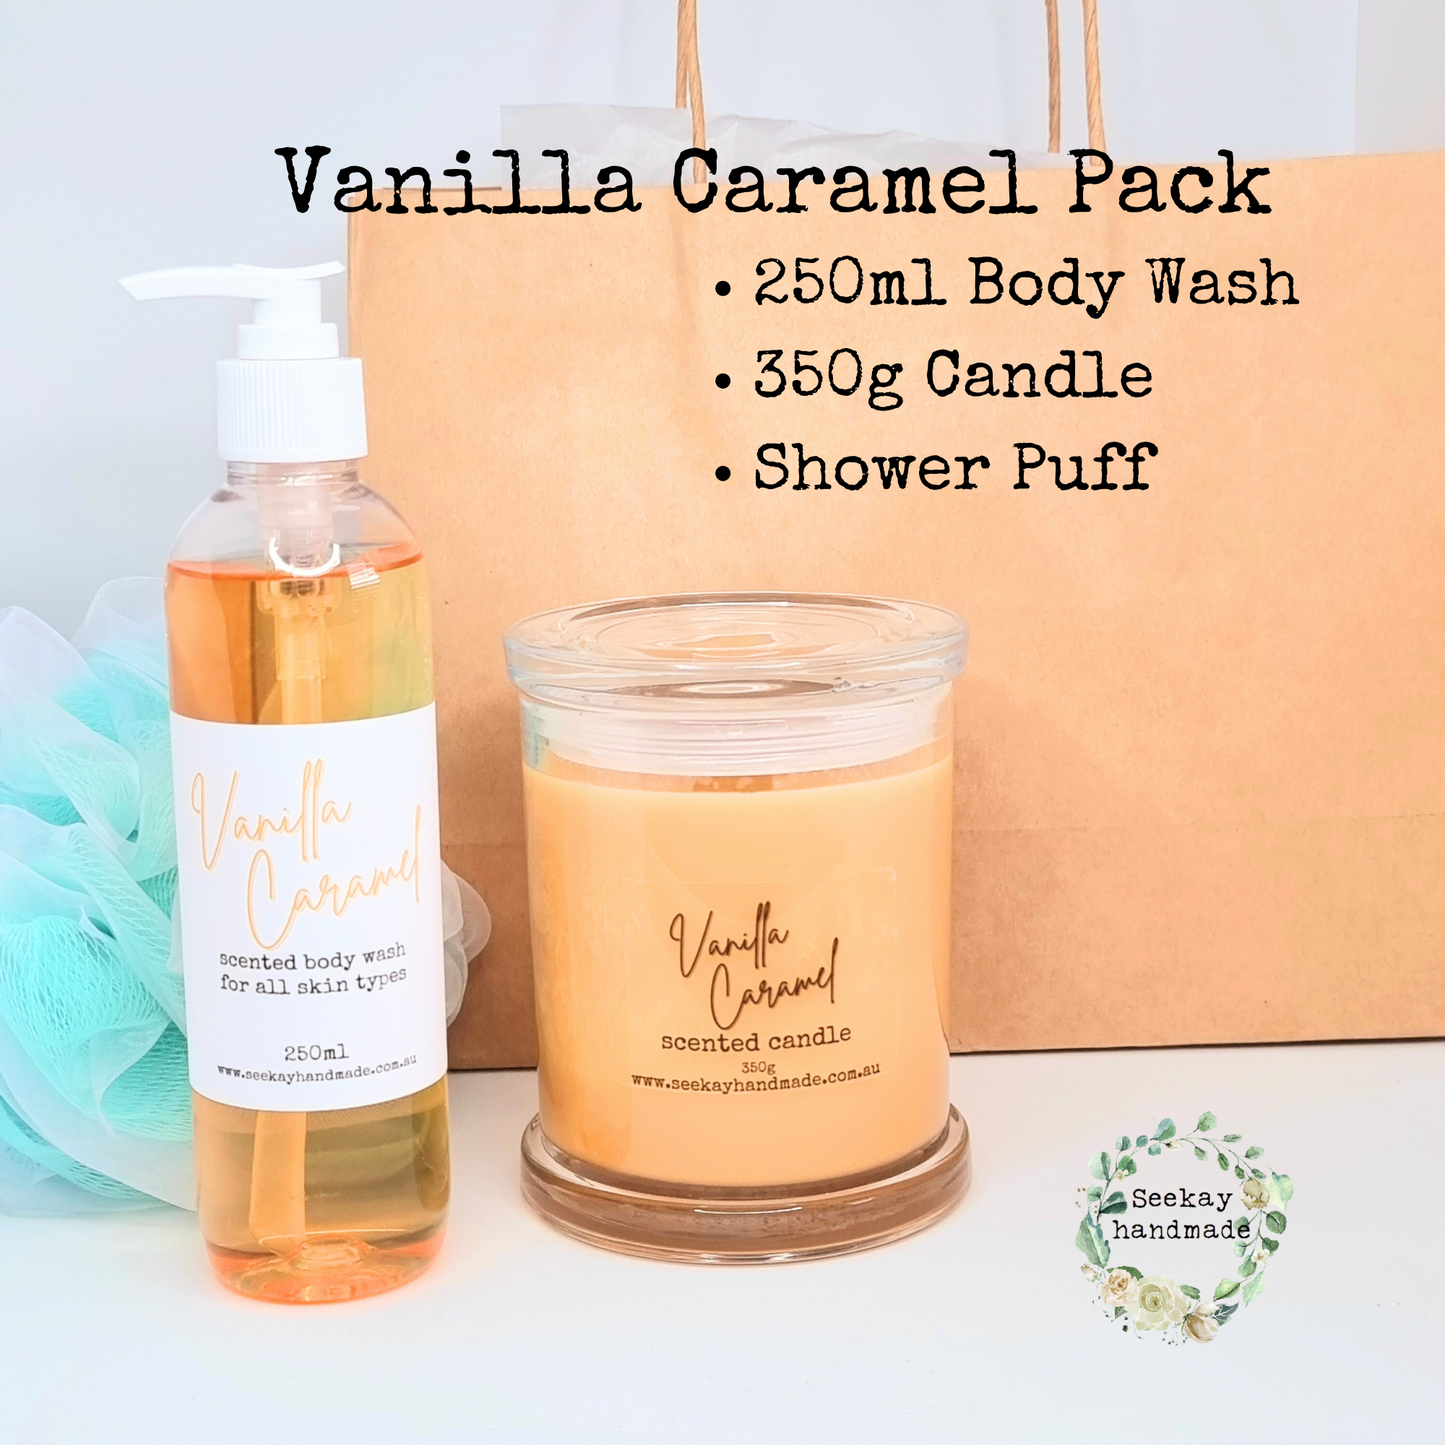 Vanilla Caramel Pack with Candle, scented body wash, gift idea, pamper pack